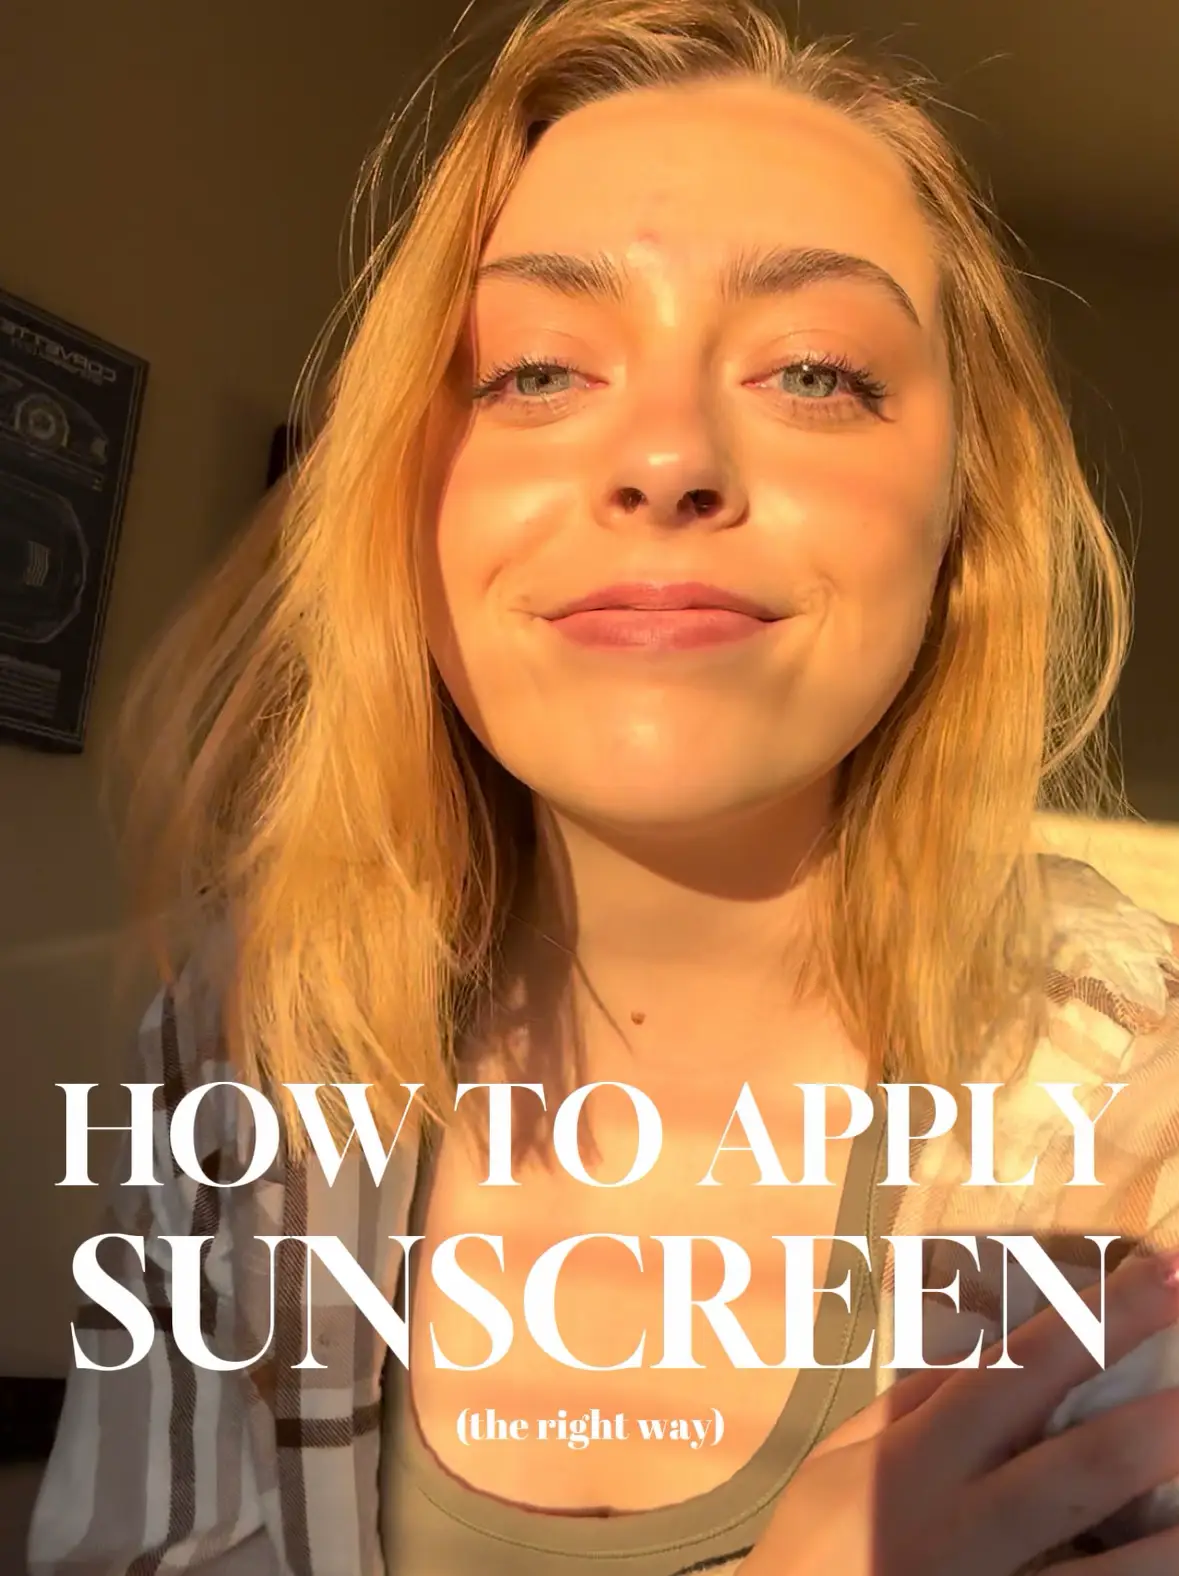 How to apply sunscreen on face?